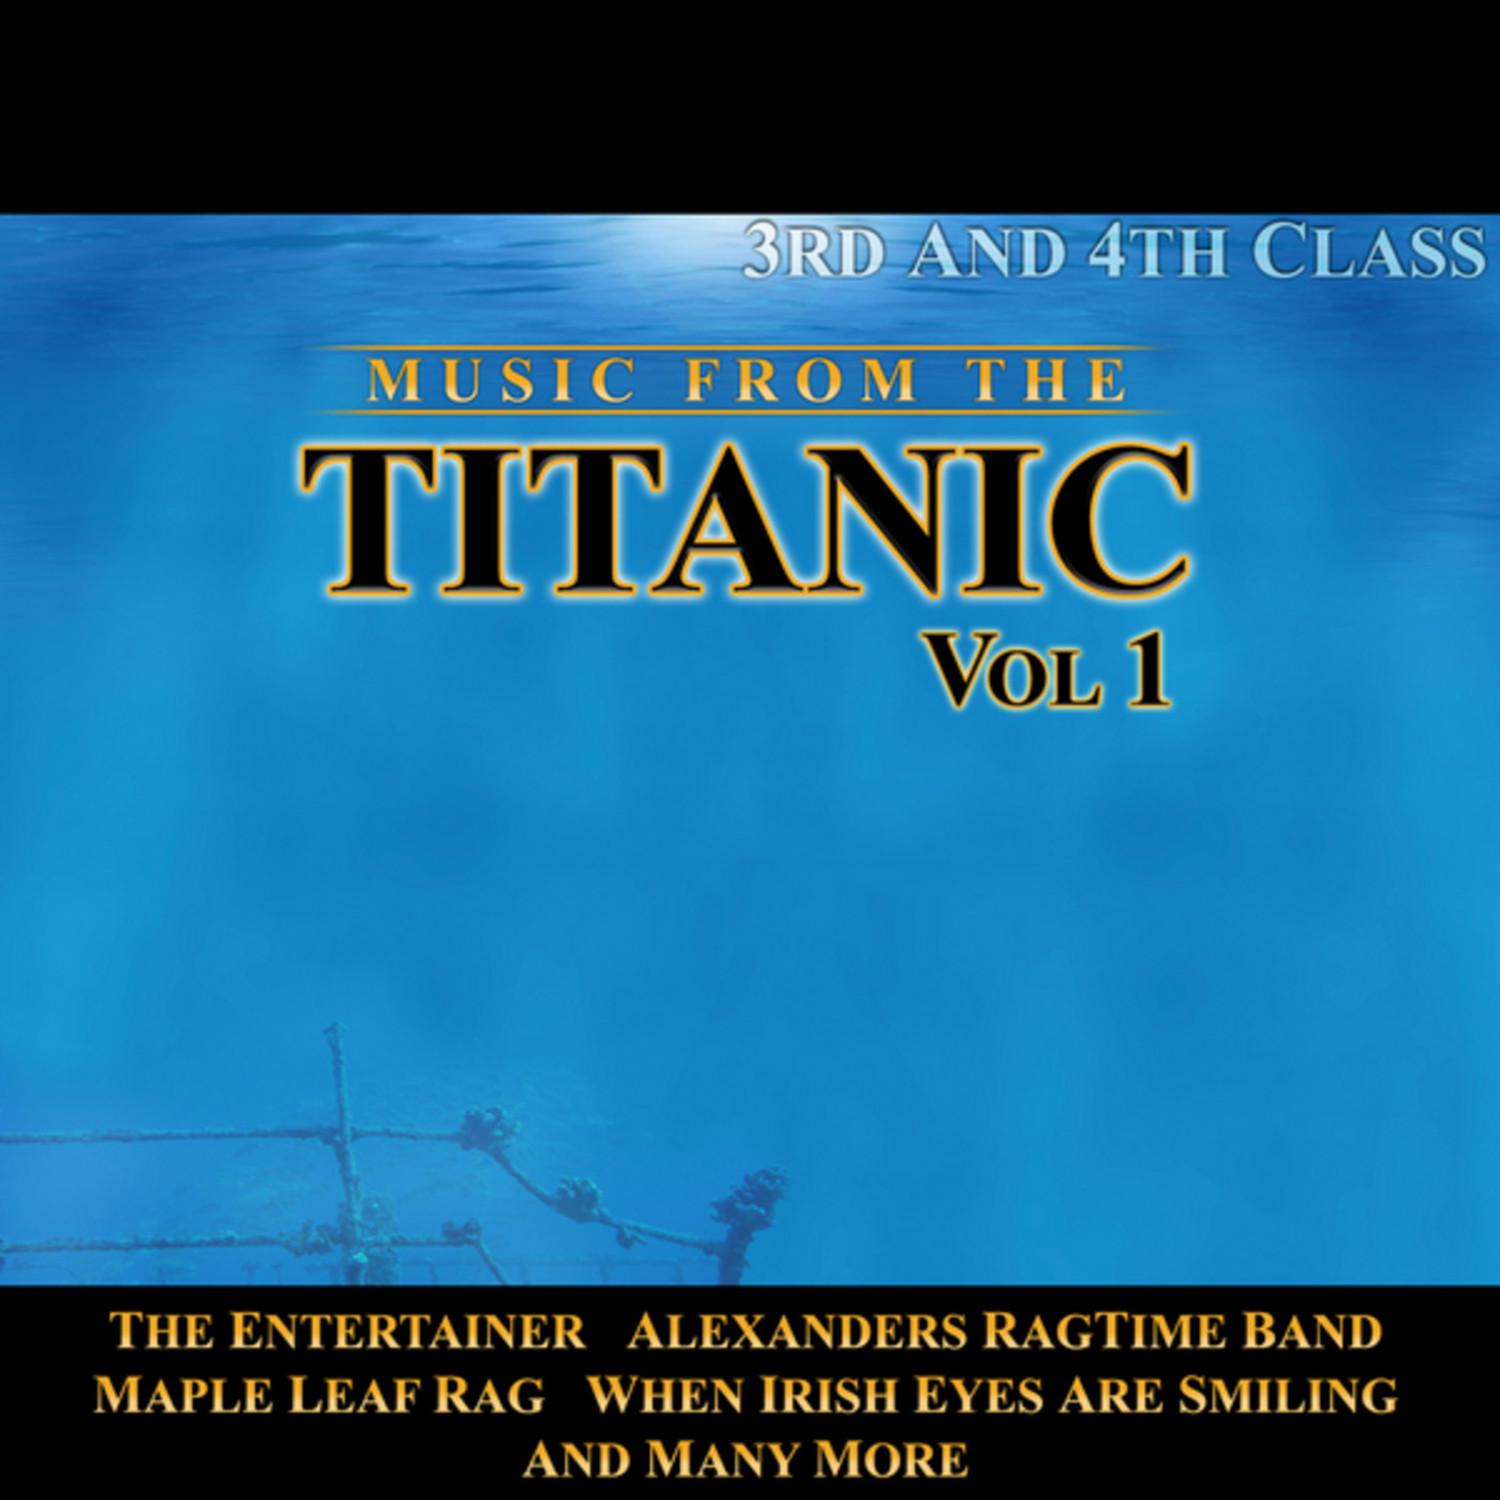 Music from the Titanic Vol. 2